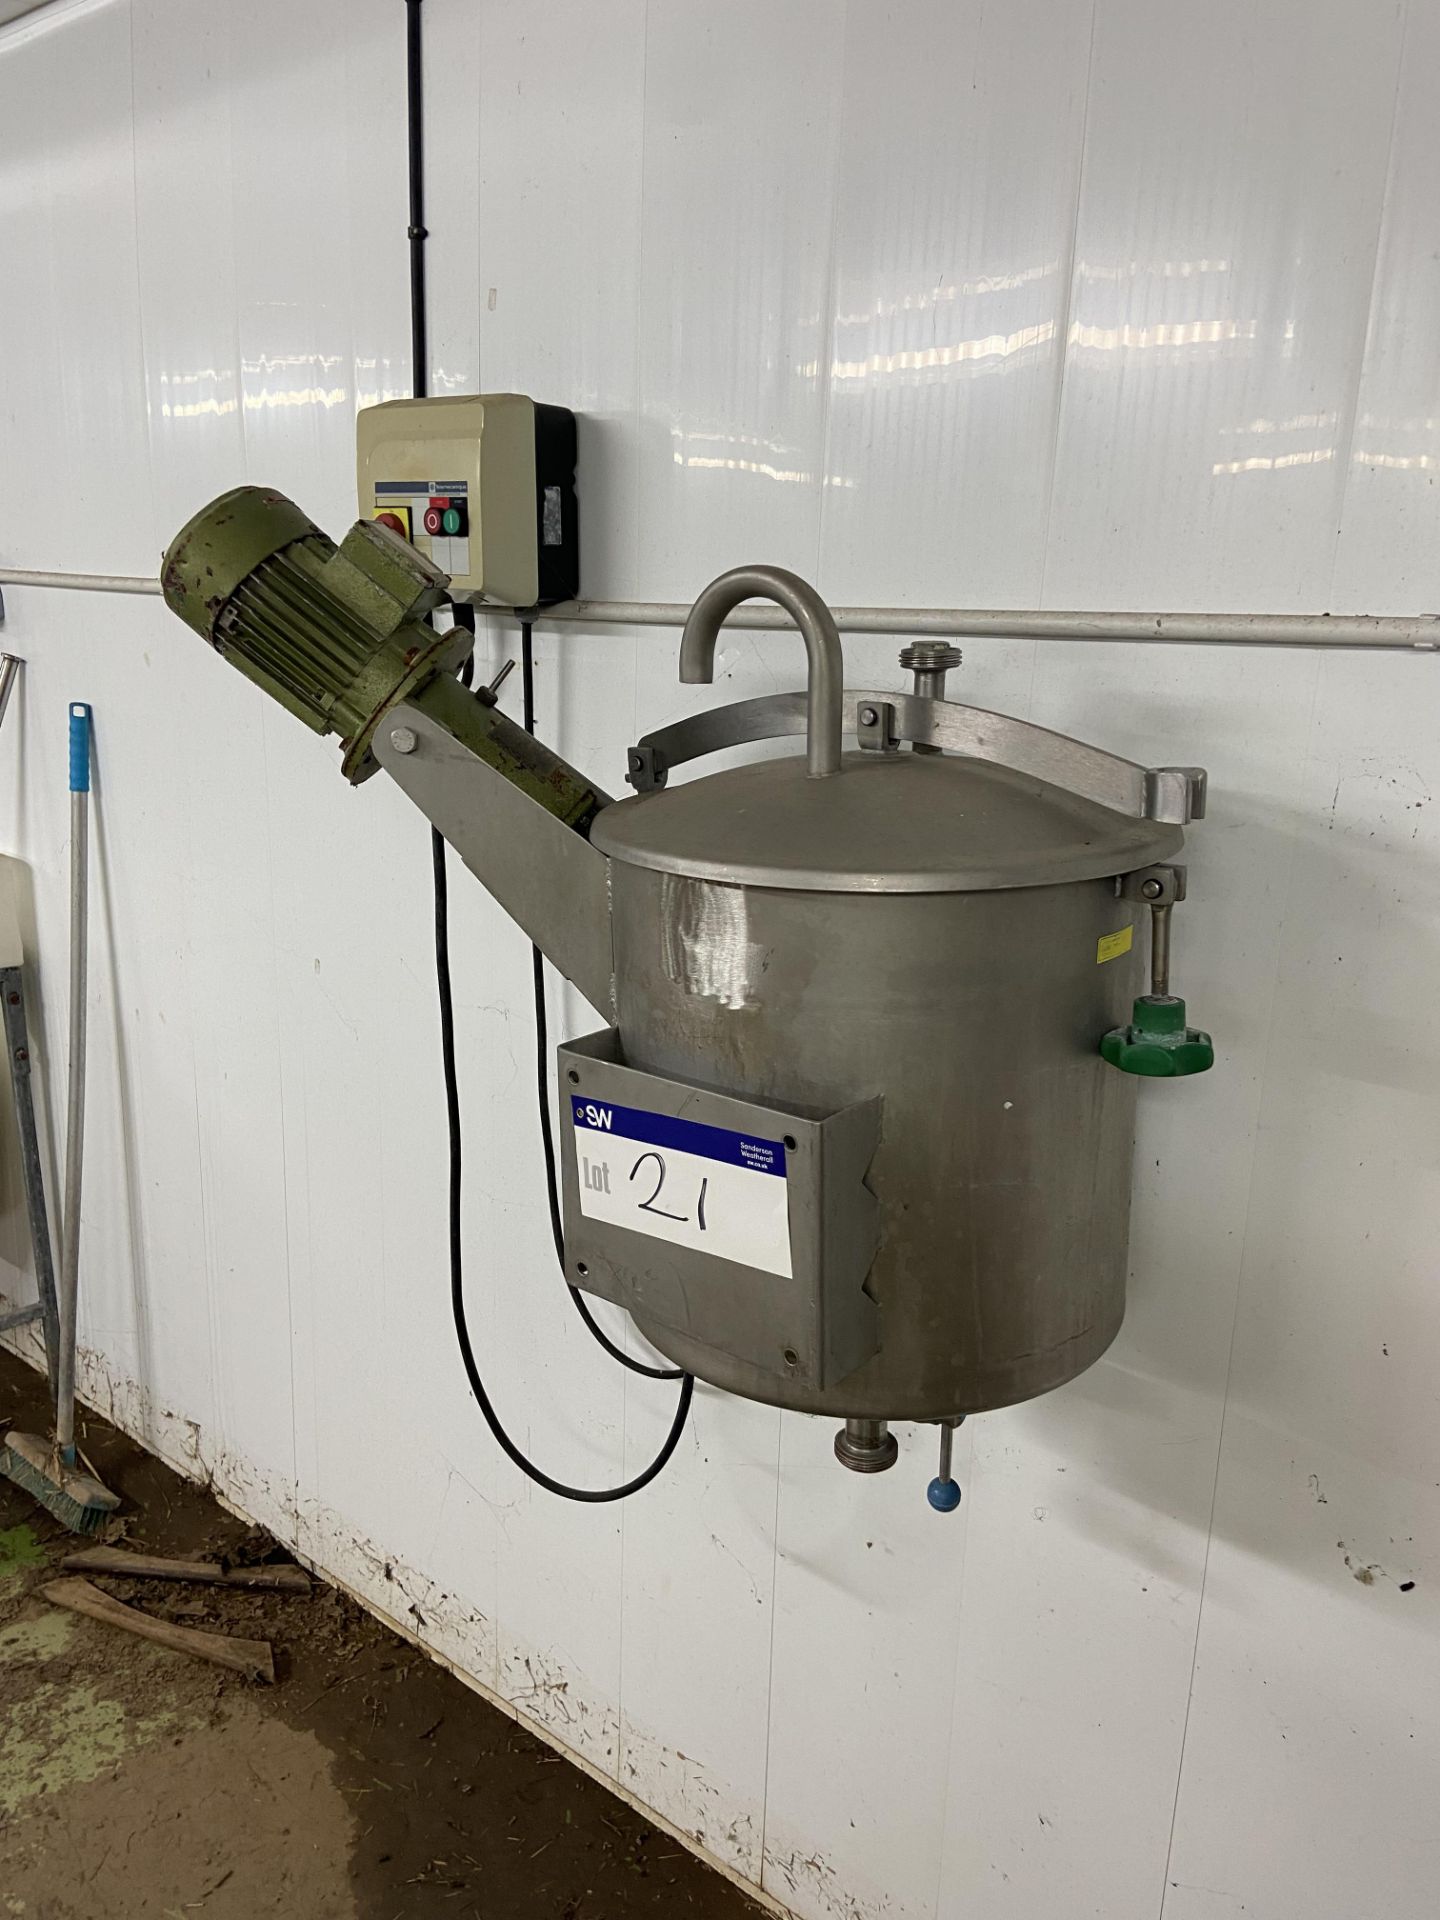 Typhoon Stainless Steel Wall Mounted Yoghurt Mixer, machine no. 87 TY, approx. 420mm dia. x 400mm